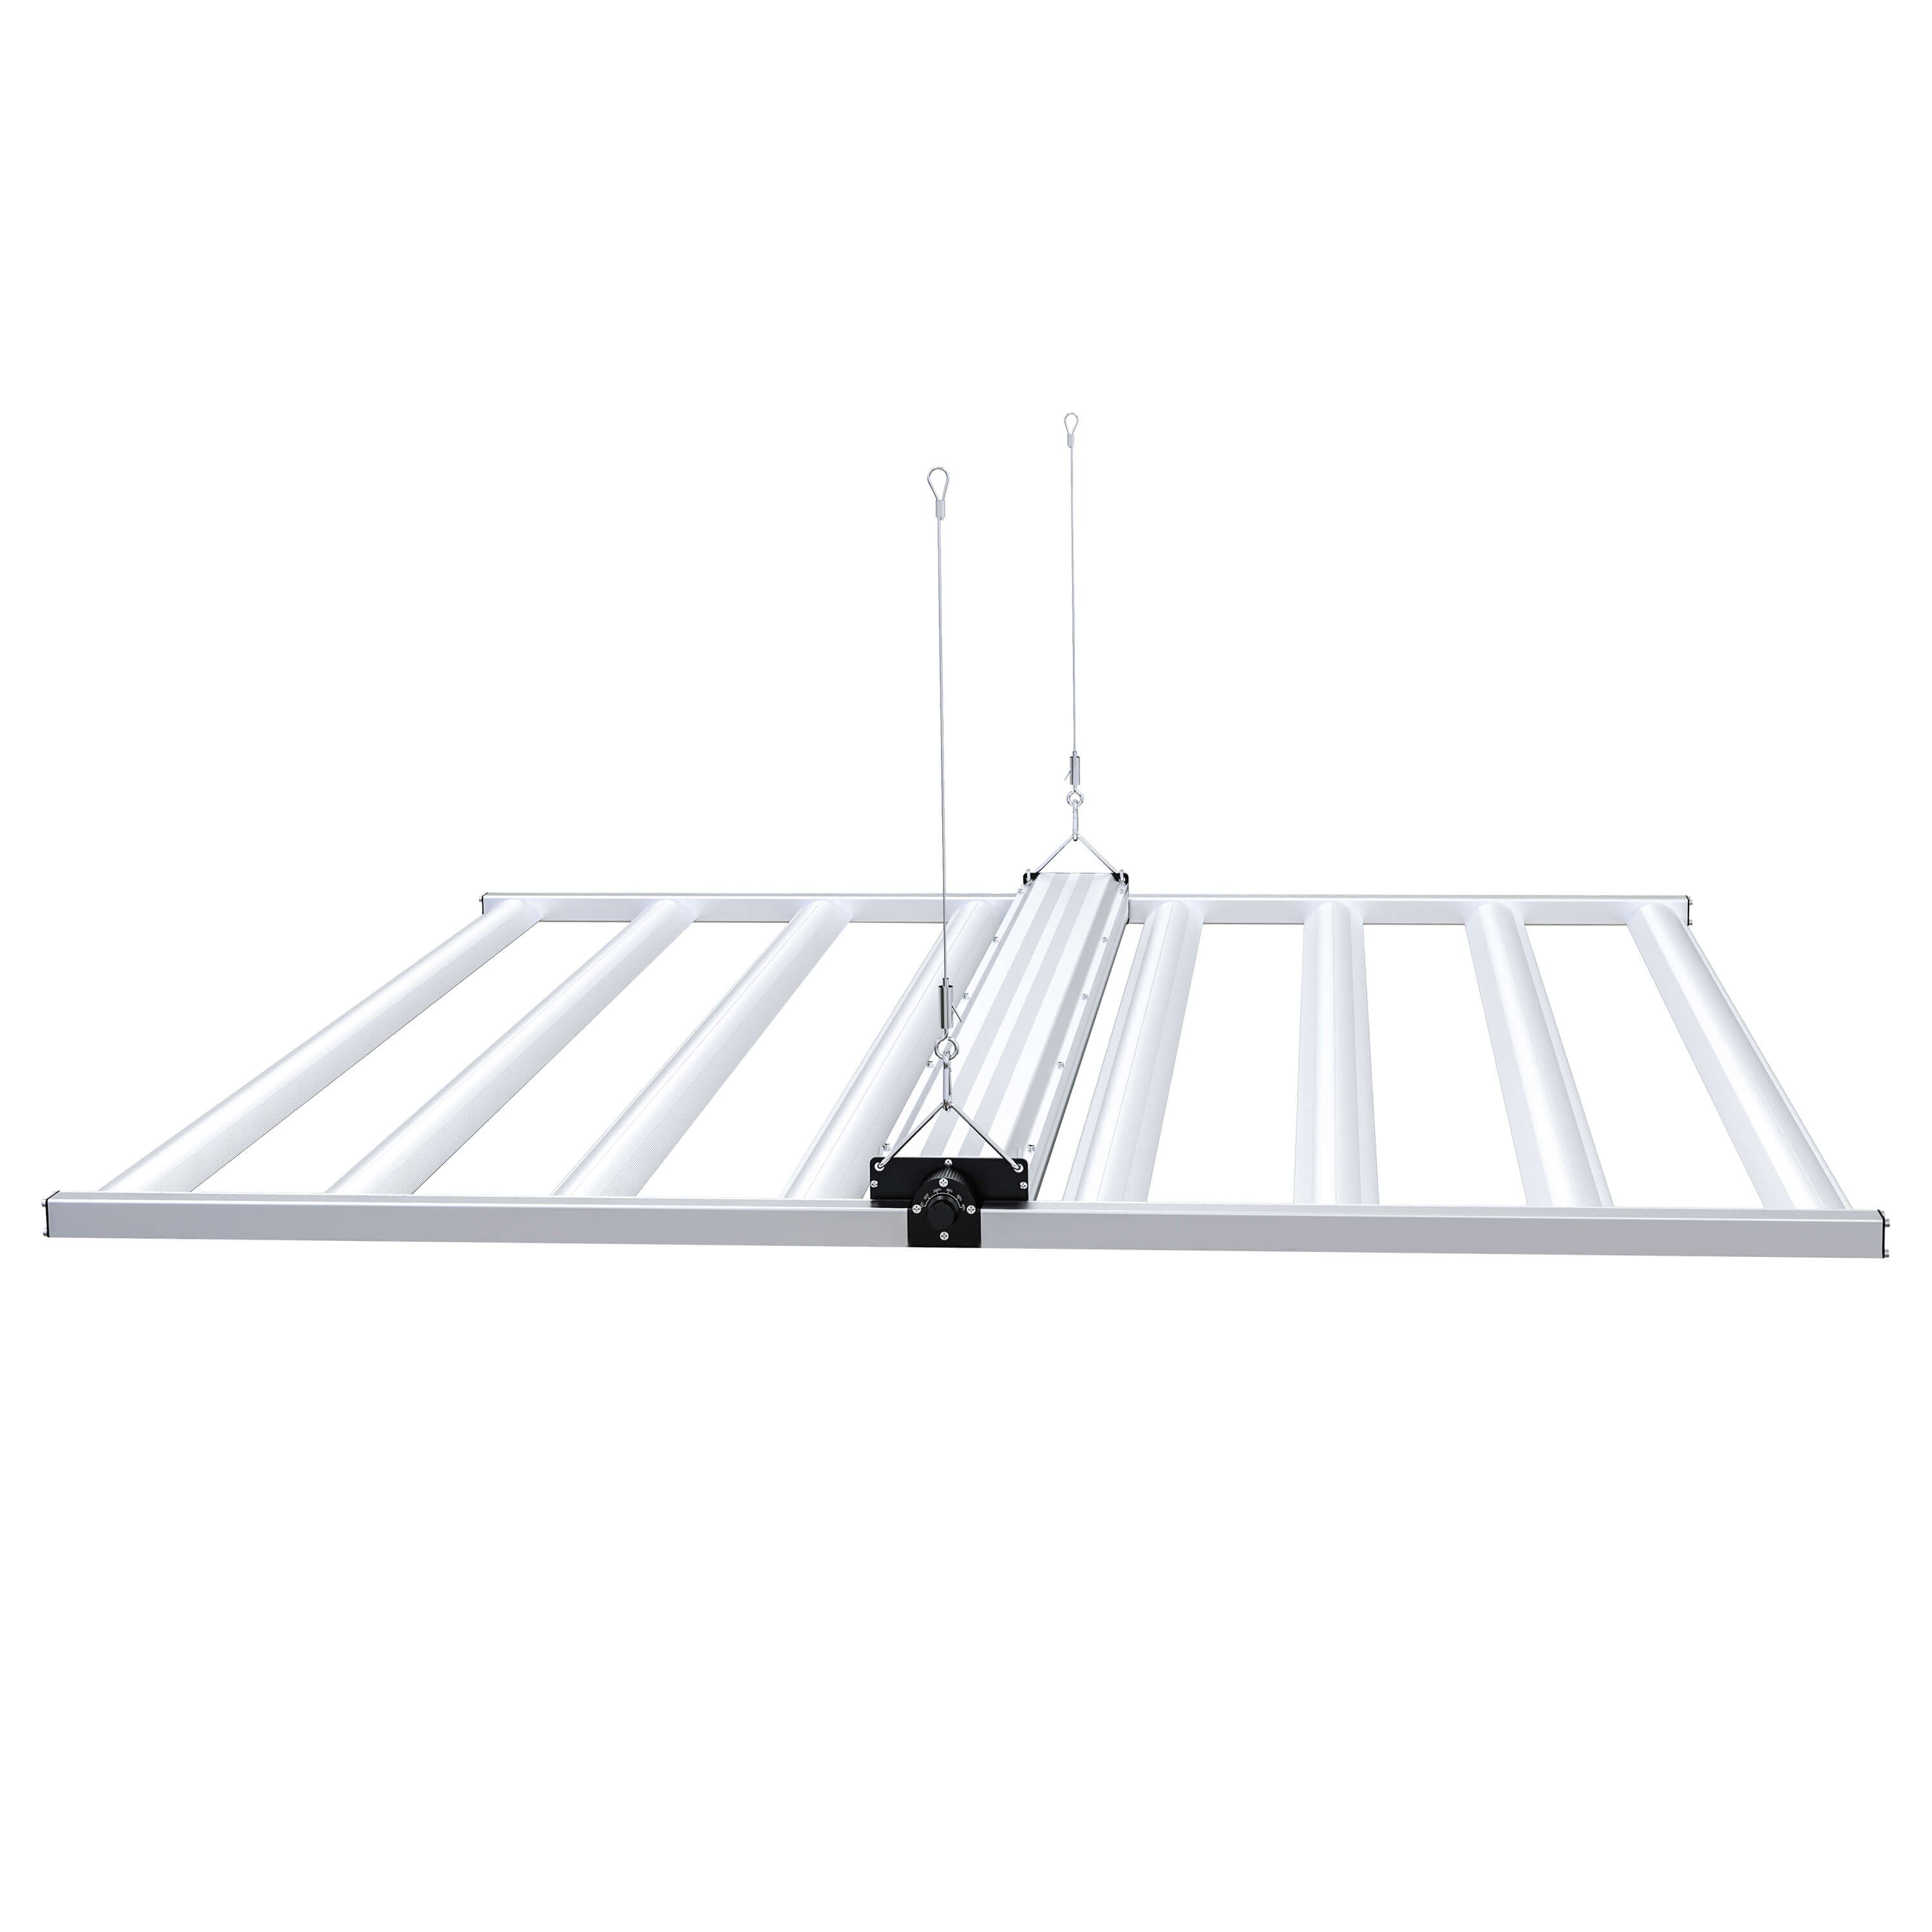 CT-720 Full Spectrum LED Grow Light - 720 Watts, 5'x5'/6'x6', Dimmable, High Efficacy, Commercial Use | Cultiuana-1